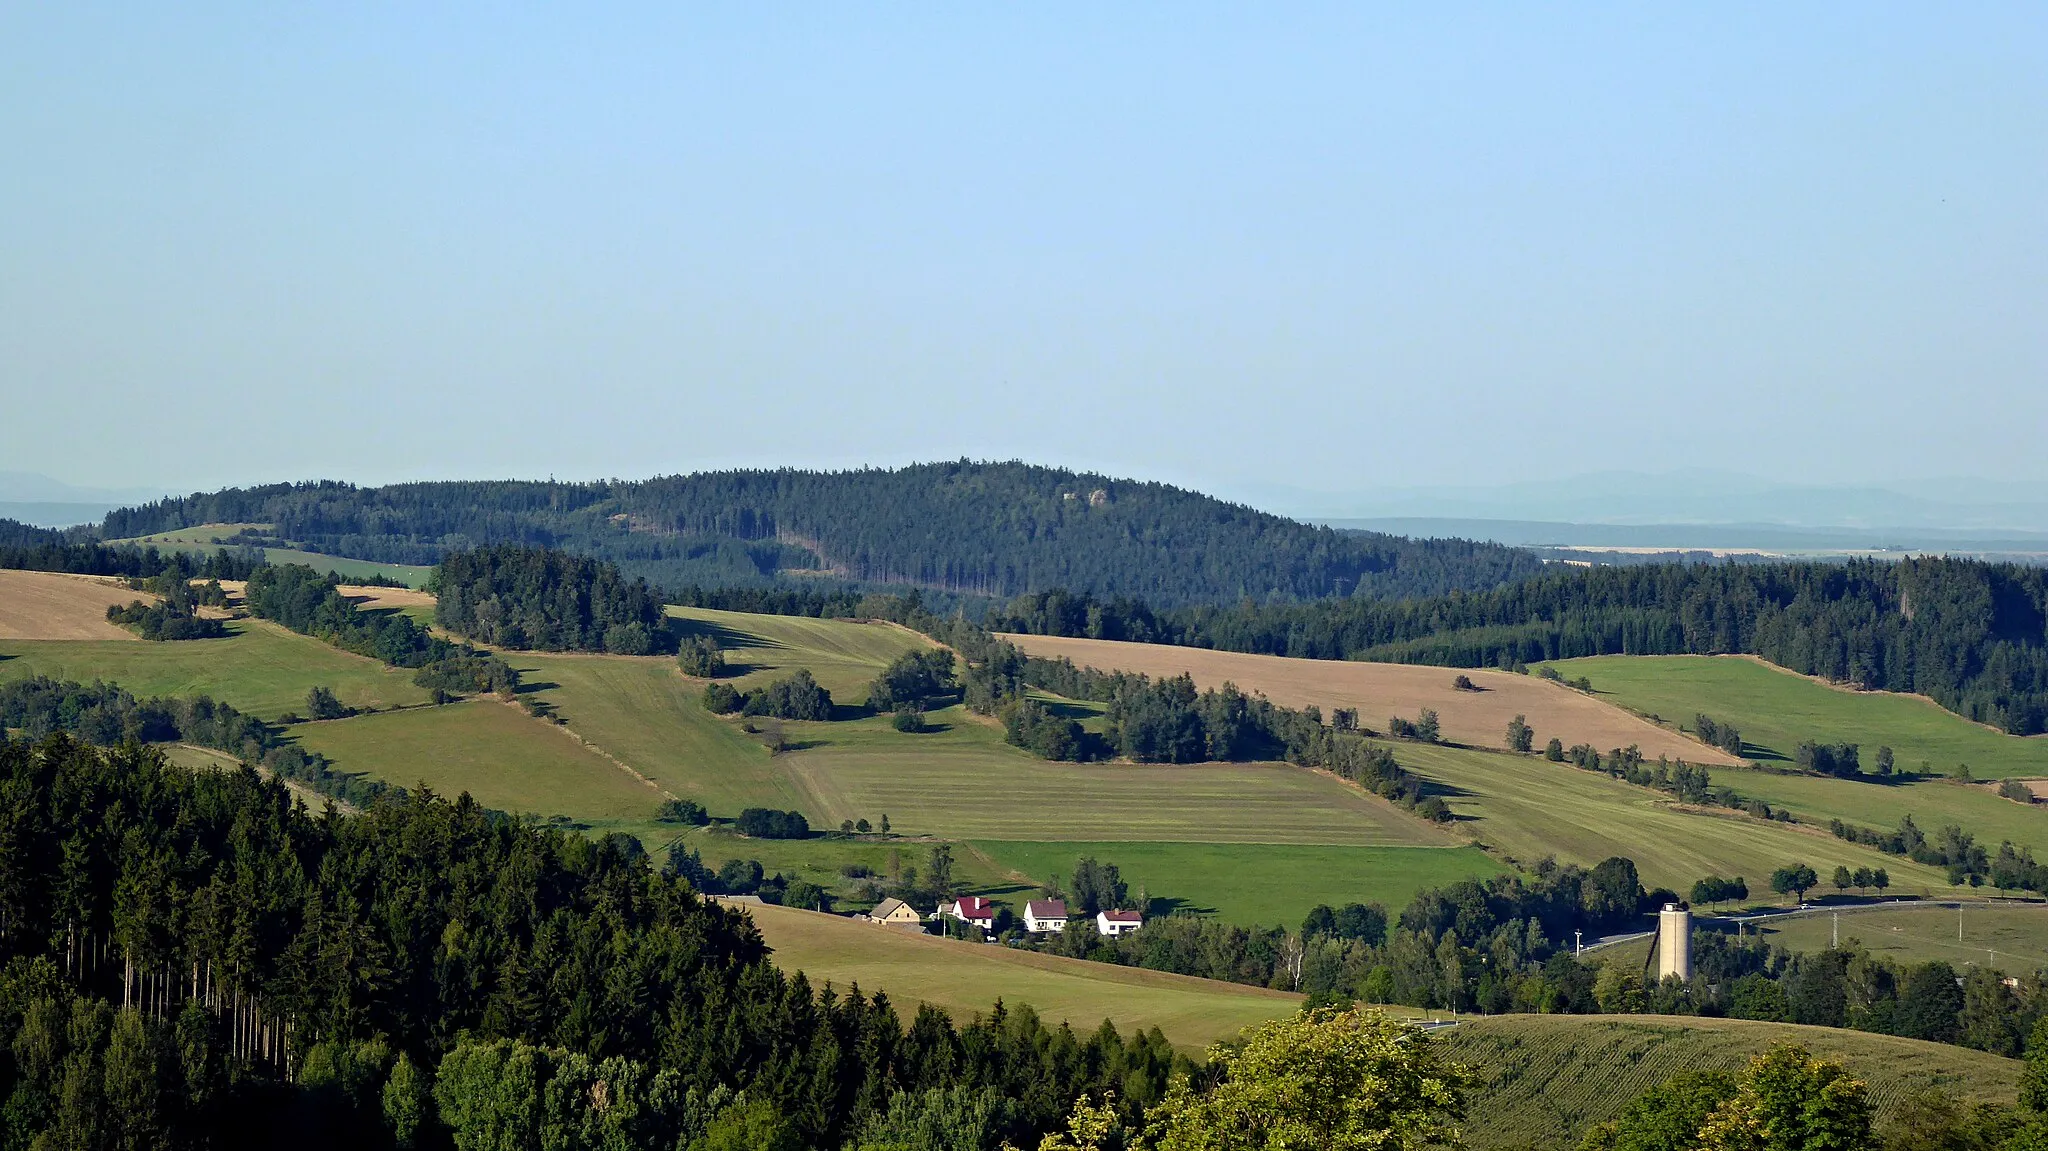 Photo showing: Shape or appearance of earth surface, exactly the face of Earth, in one word georelief in of part of the "Pohledeckoskalská" Highlands. View from the slope of the "Kamenice" hill (780 m above sea level) in the northeast direction to the peak of "Prosíčka" (739.4 m above sea level), in the middle photo. Photo-location: Czechia, "Vysočina" Region, village "Roženecké Paseky" (part of municipality "Věcov"), "Pohledeckoskalská" Highlands (30°). The rocks modeling surface forms of the earth's crust, is part of the litosphere of the Earth. Georelief is very complicated, the upper surface forms soil cover (pedosphere) of different thickness. In many places, rock outputs of varying sizes and heights appear. The georelief is broken down by height in to two basic types, are it lowlands or highlands and also subtypes, for example a plains, a land knoll hills (czech landscape of small hills, hilly country), a highlands, a mountains and big mountains. In regional divide are types of georelief localized into territorial geomorphological units. In the Czech Republic there is a division: province, system, sub-system, whole (in territory complex), part of whole (of complex) and the district. The "Pohledeckoskalská" Highland is a type of rugged highland at altitudes of 395-822 metres forming a geomorphological district.